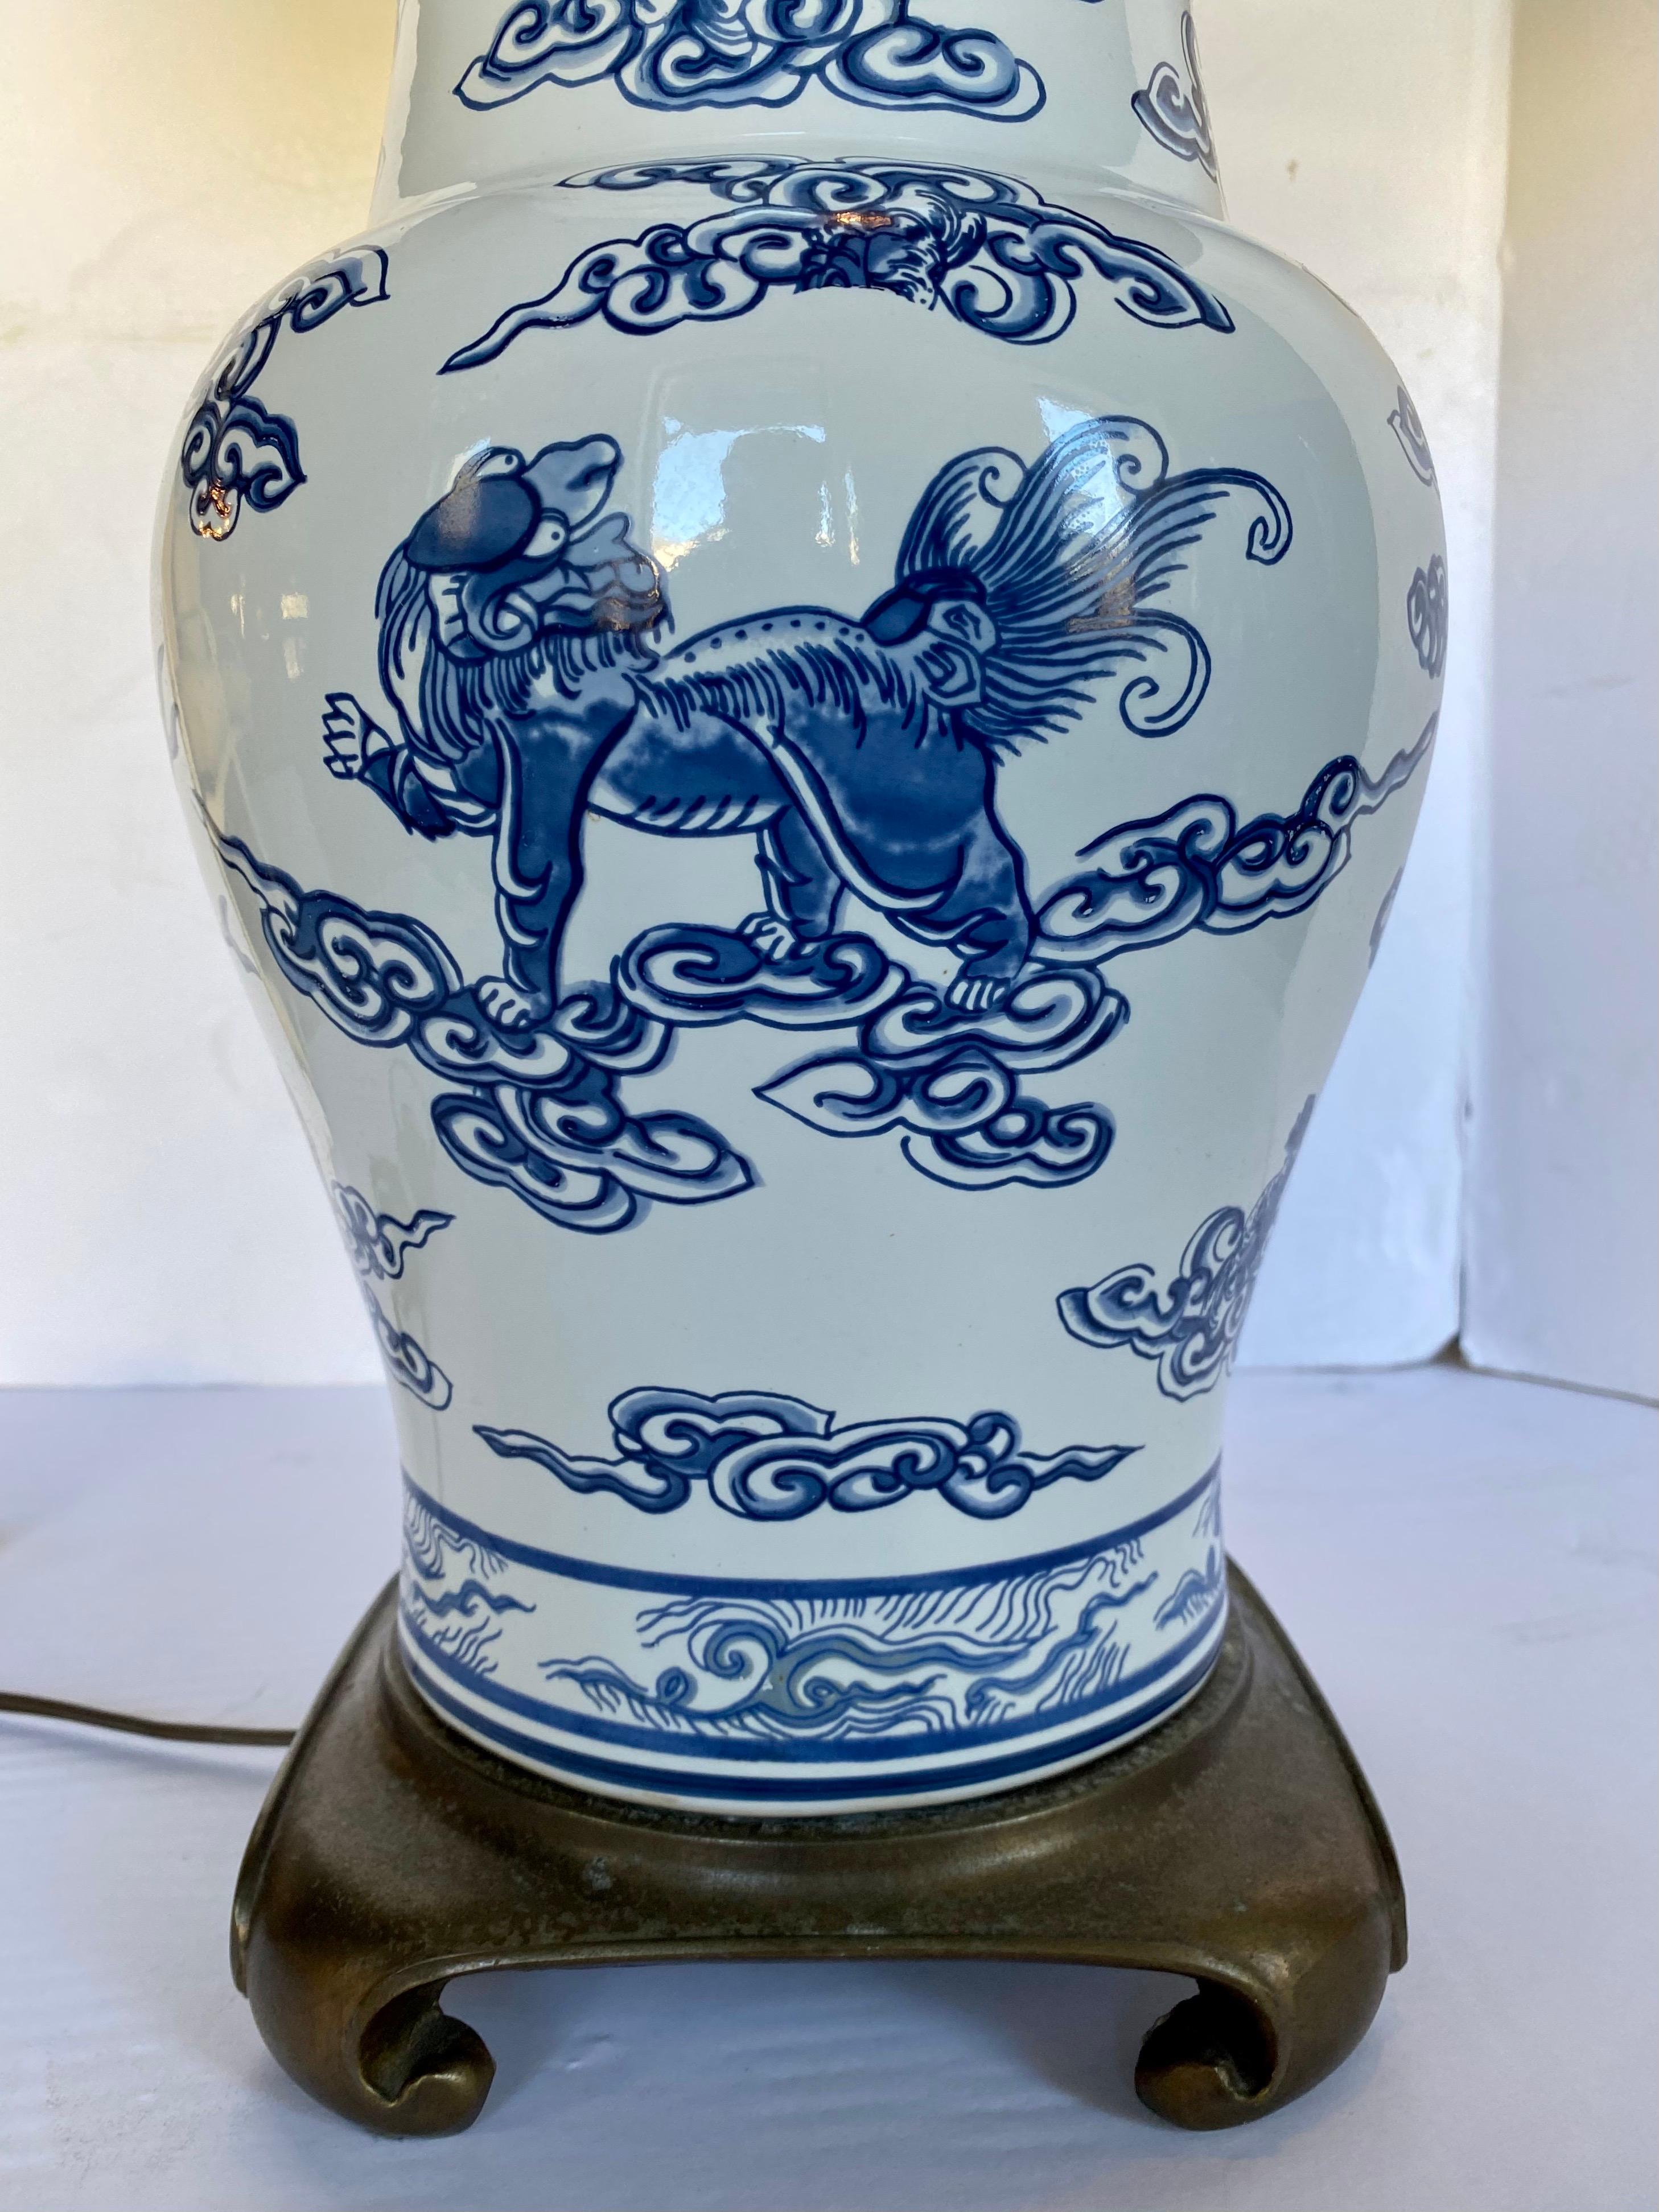 Large chinoiserie style blue and white porcelain ginger jar table lamp mounted on Ming style brass base. Classic urn vase shaped body is decorated with Chinese motifs, foo dogs and blue coral. Lamp shade not included.